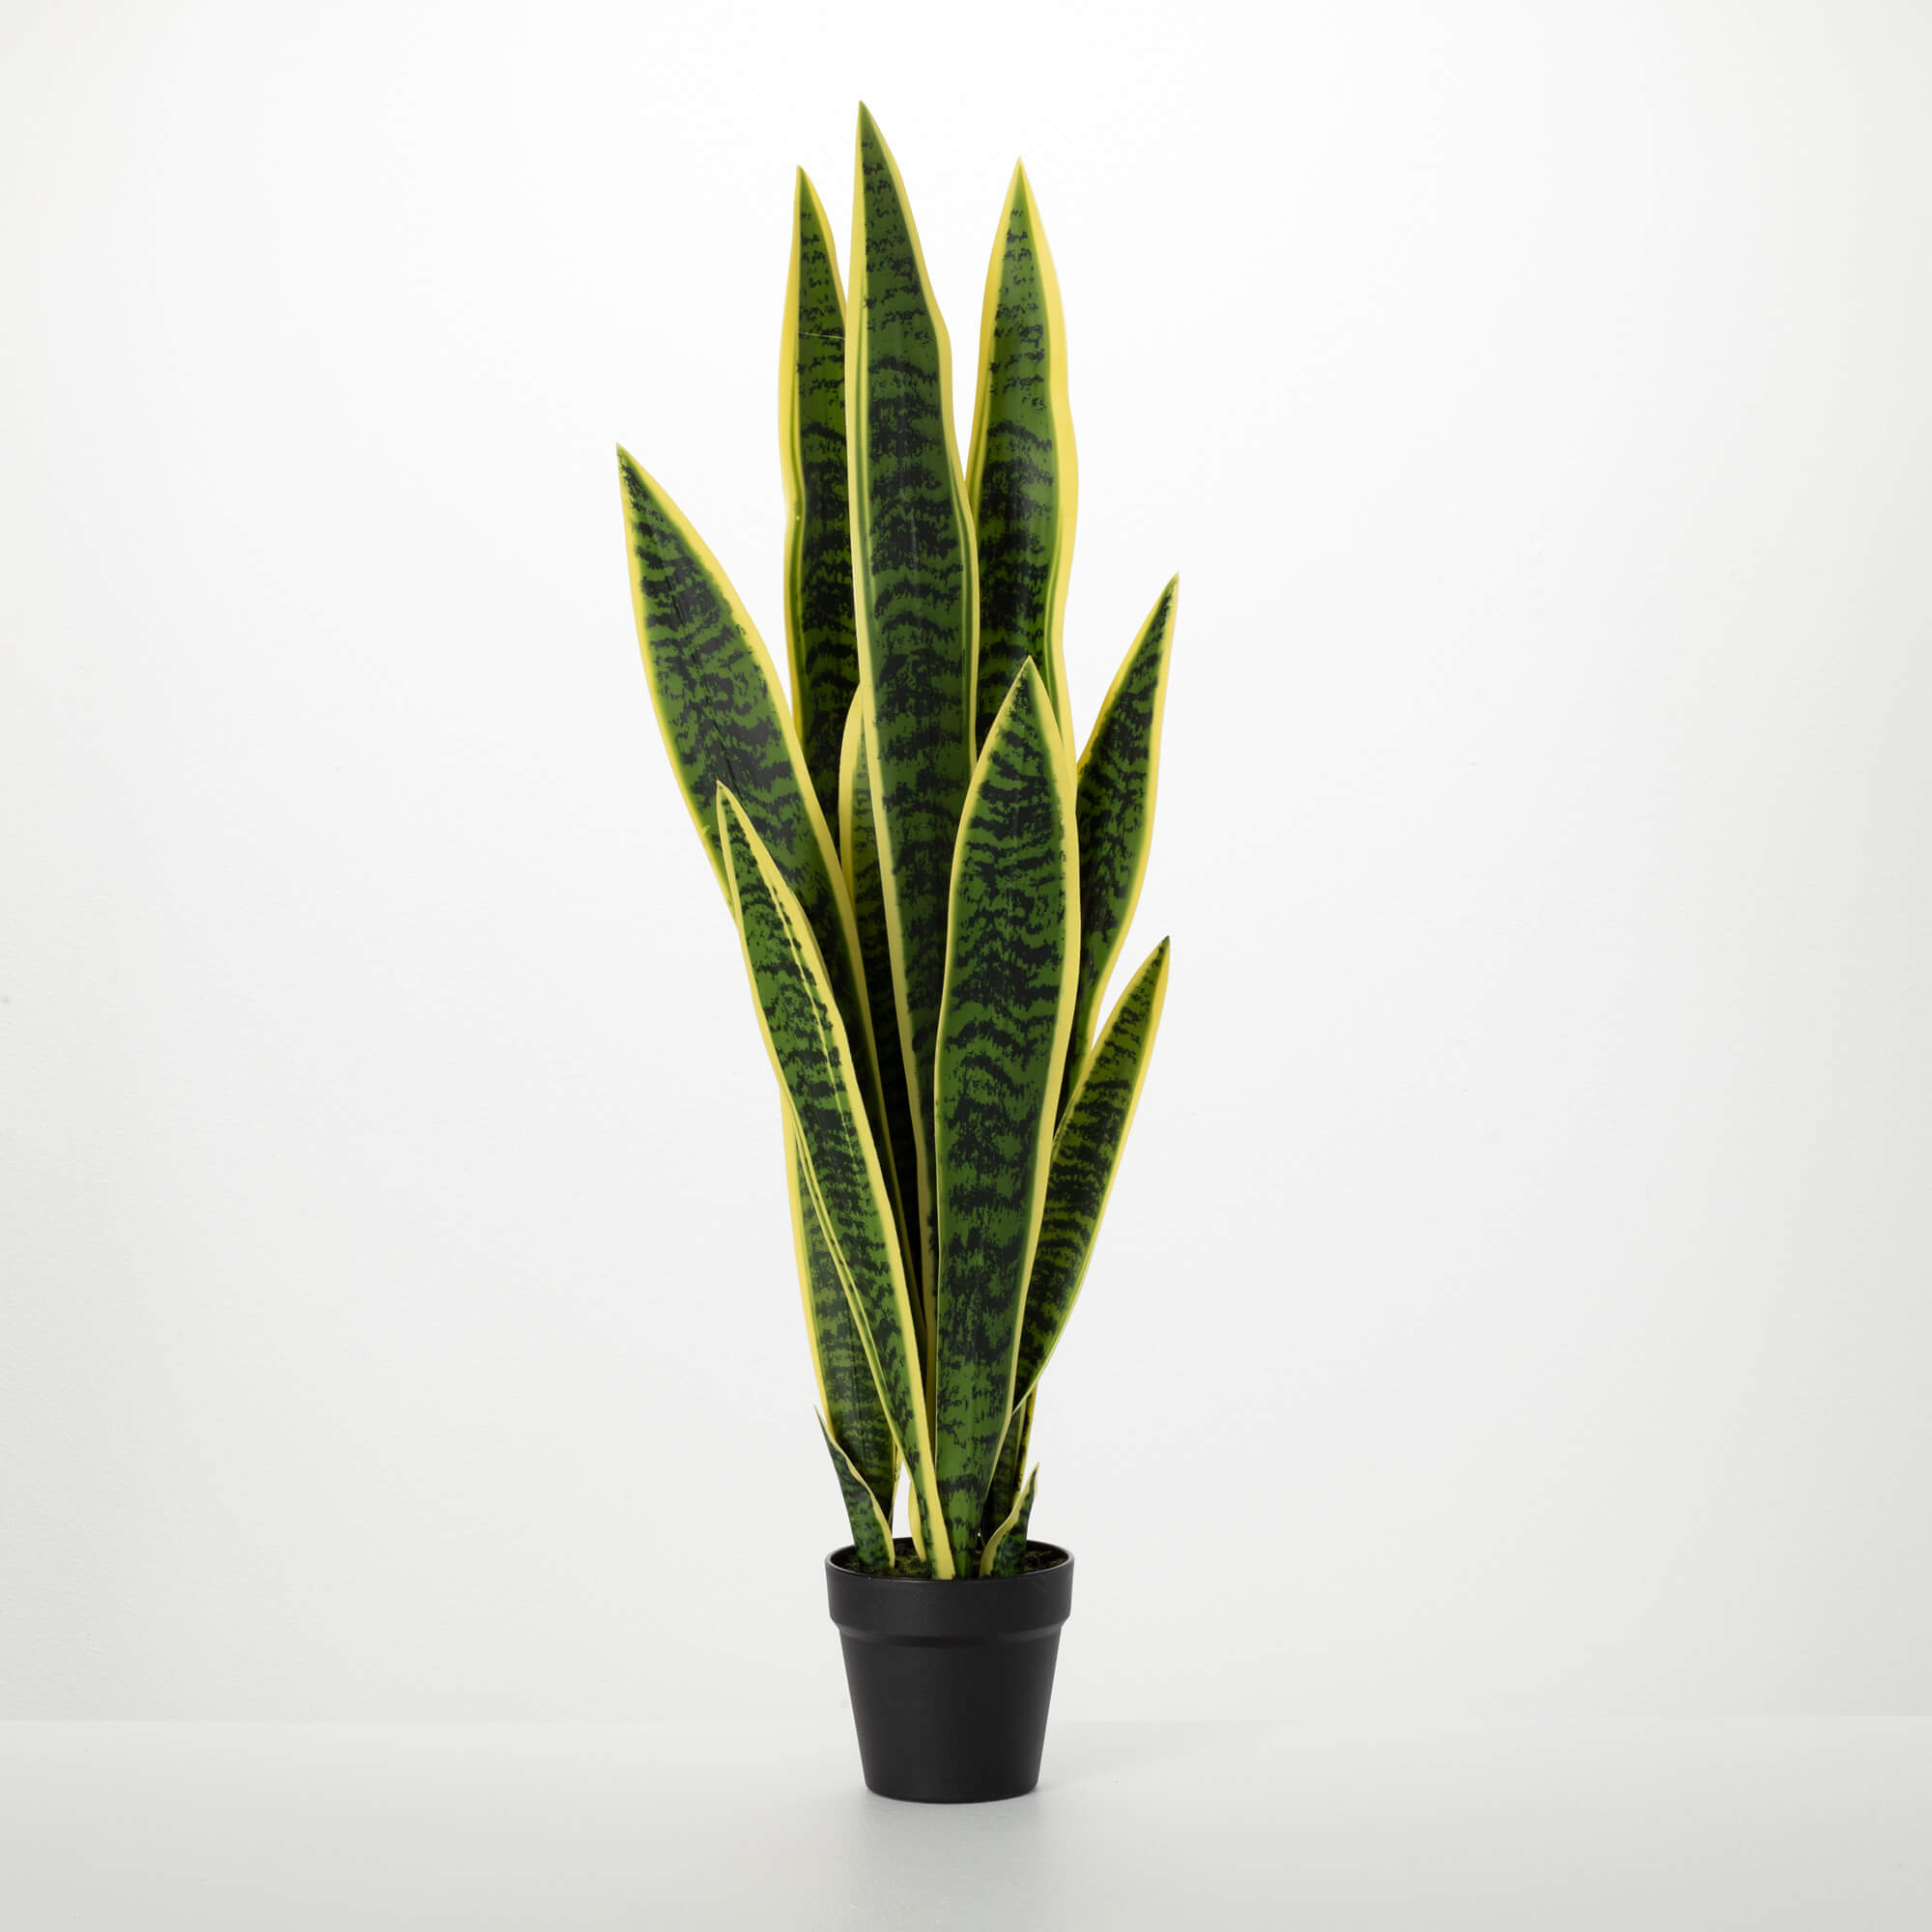 3' POTTED SANSEVIERIA TREE